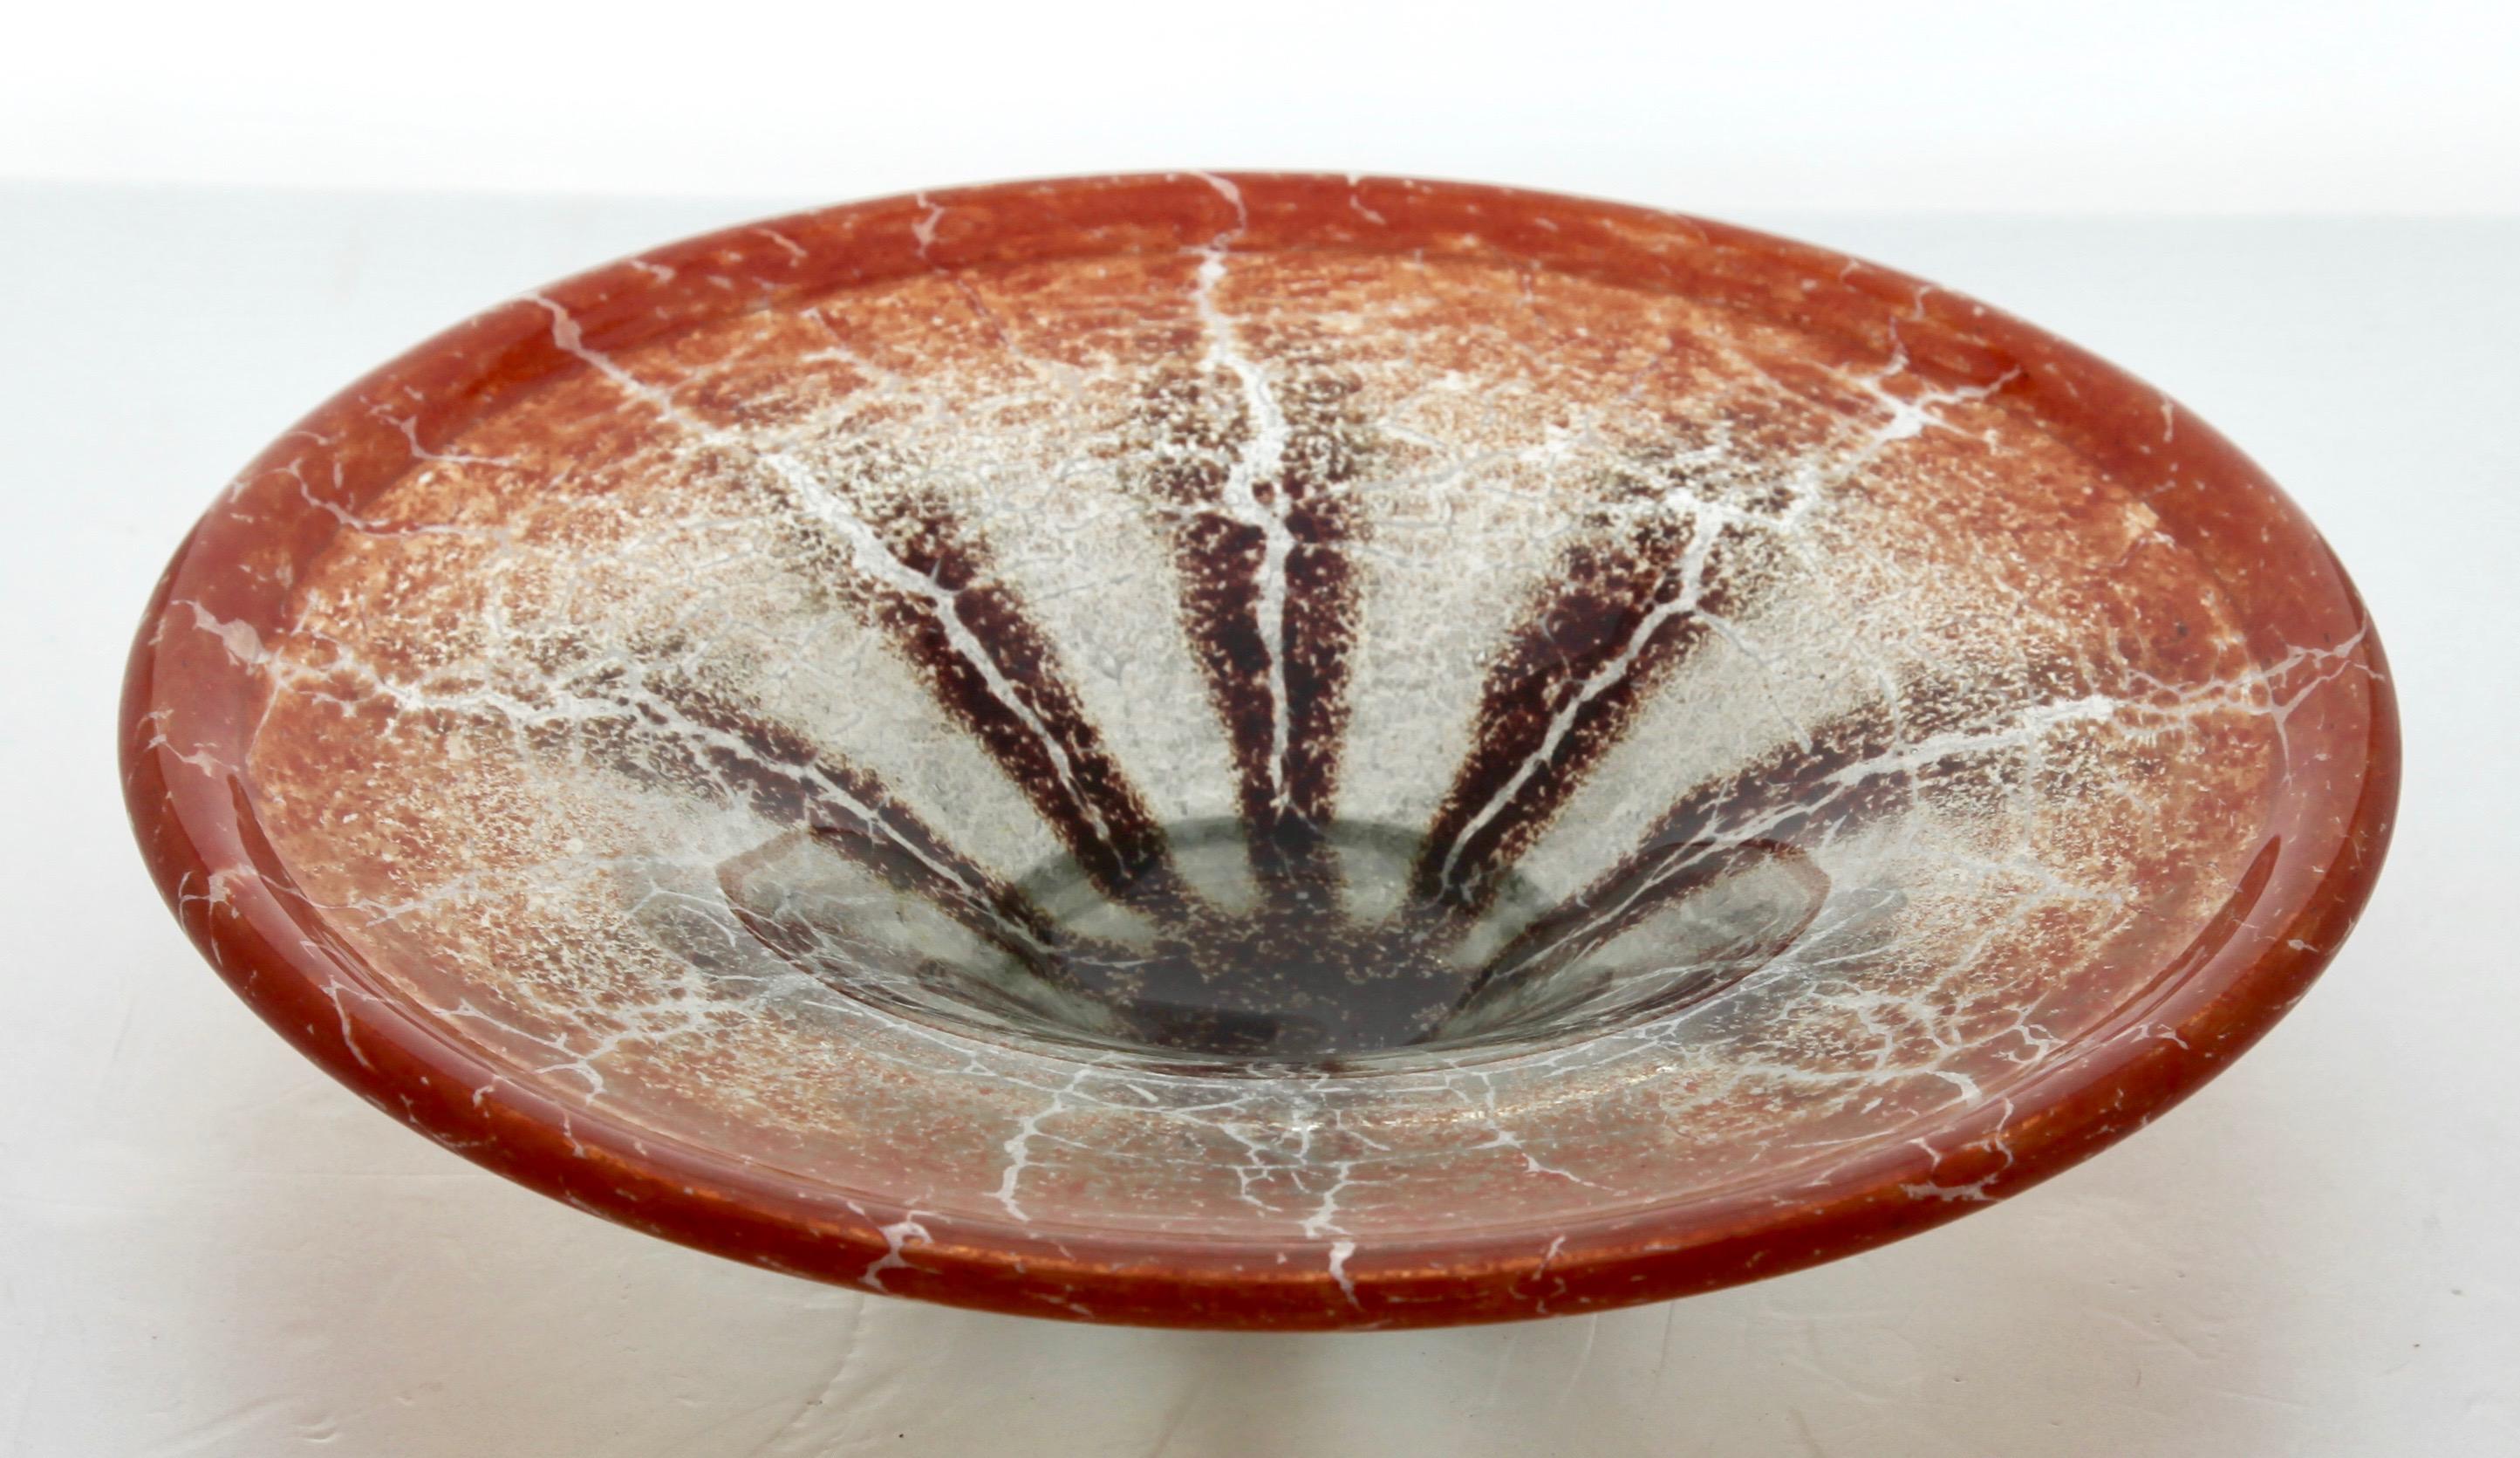 'Ikora' Art Glass Bowl, Produced, by WMF in Germany, 1930s by Karl Wiedmann For Sale 2